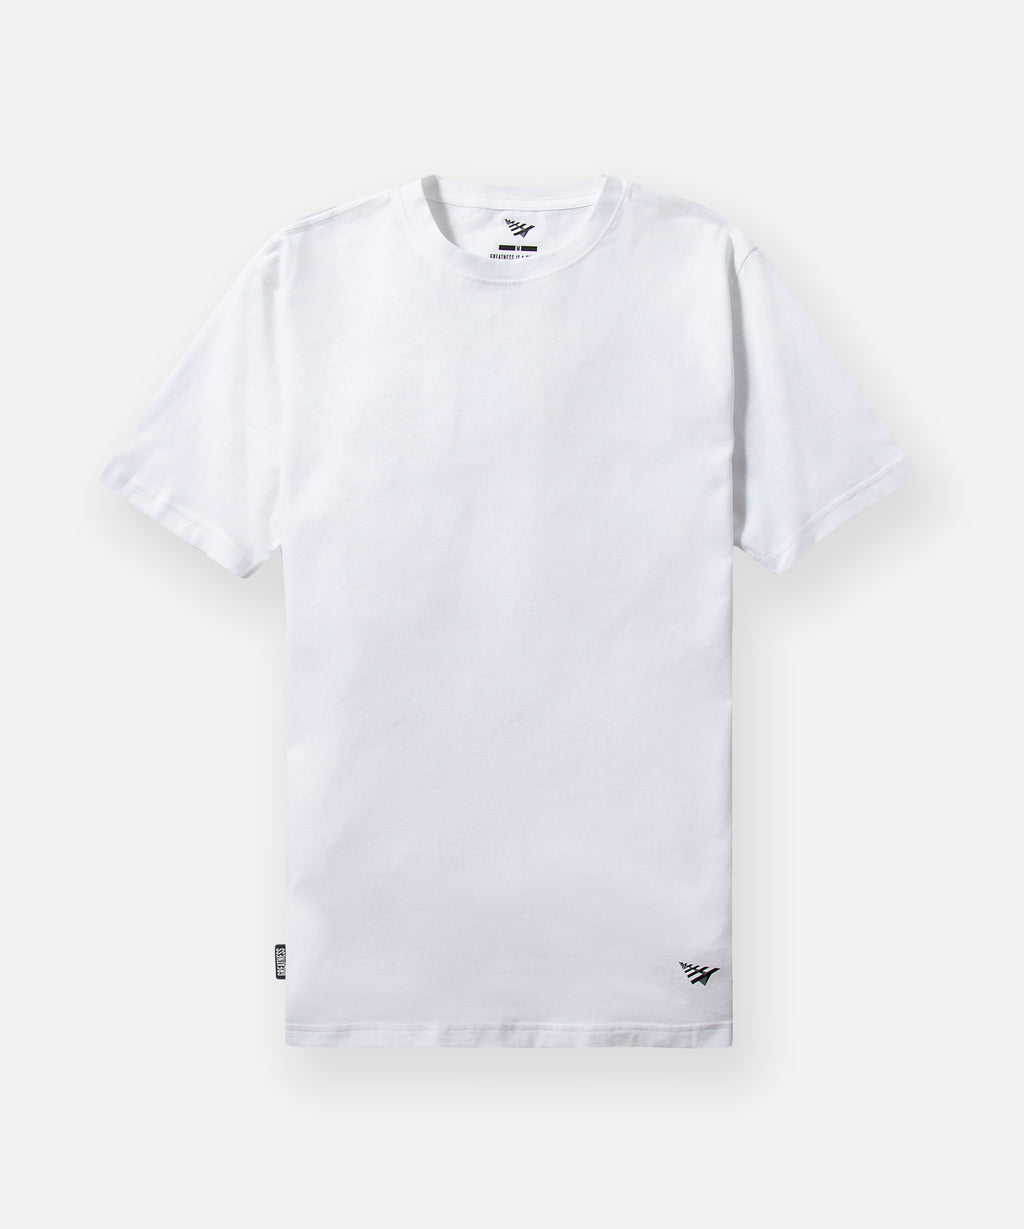  Paper Planes Essential Tee, color White.